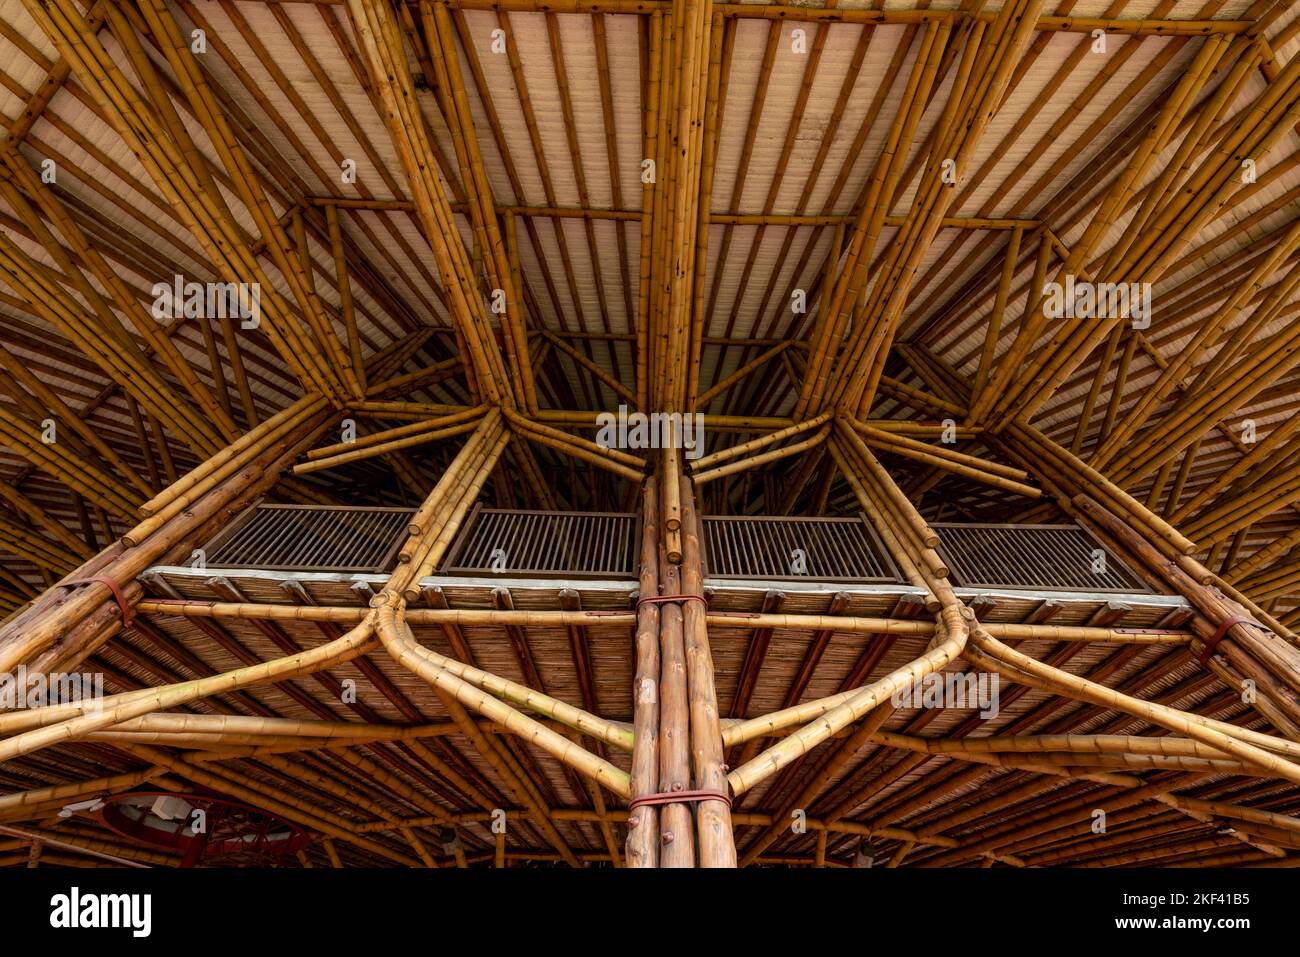 Detail of a bamboo construction in Colombia, Manizales, Caldas, Antioquia, South America Stock Photo